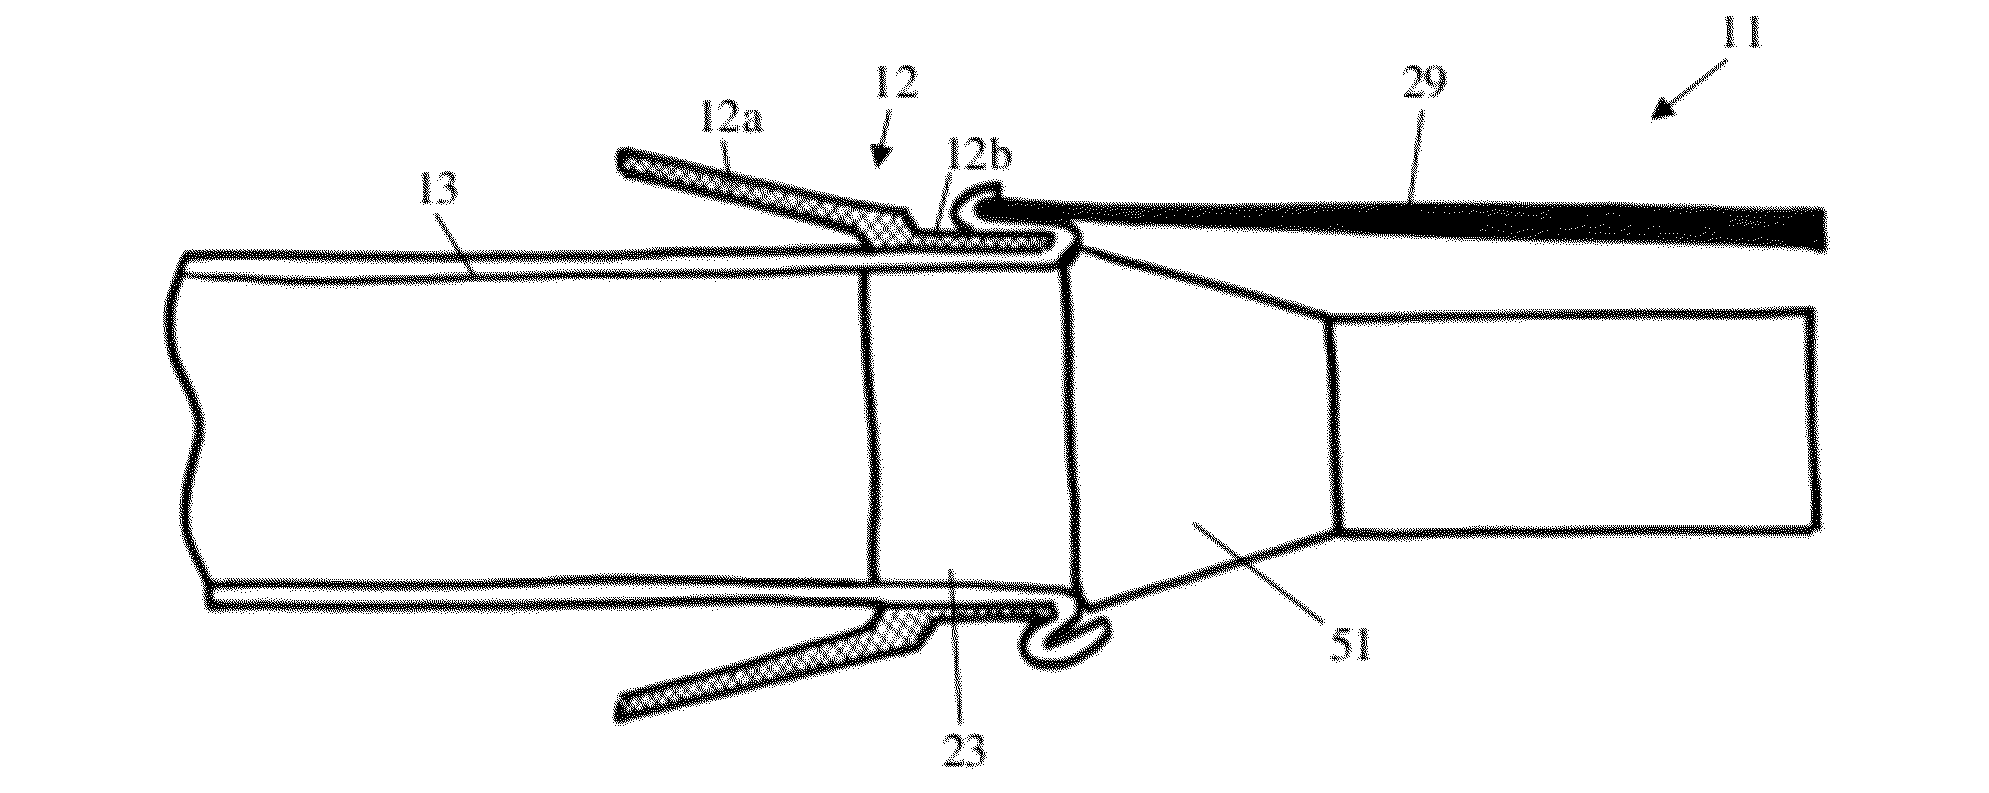 Device for preparing tissue for anastomosis